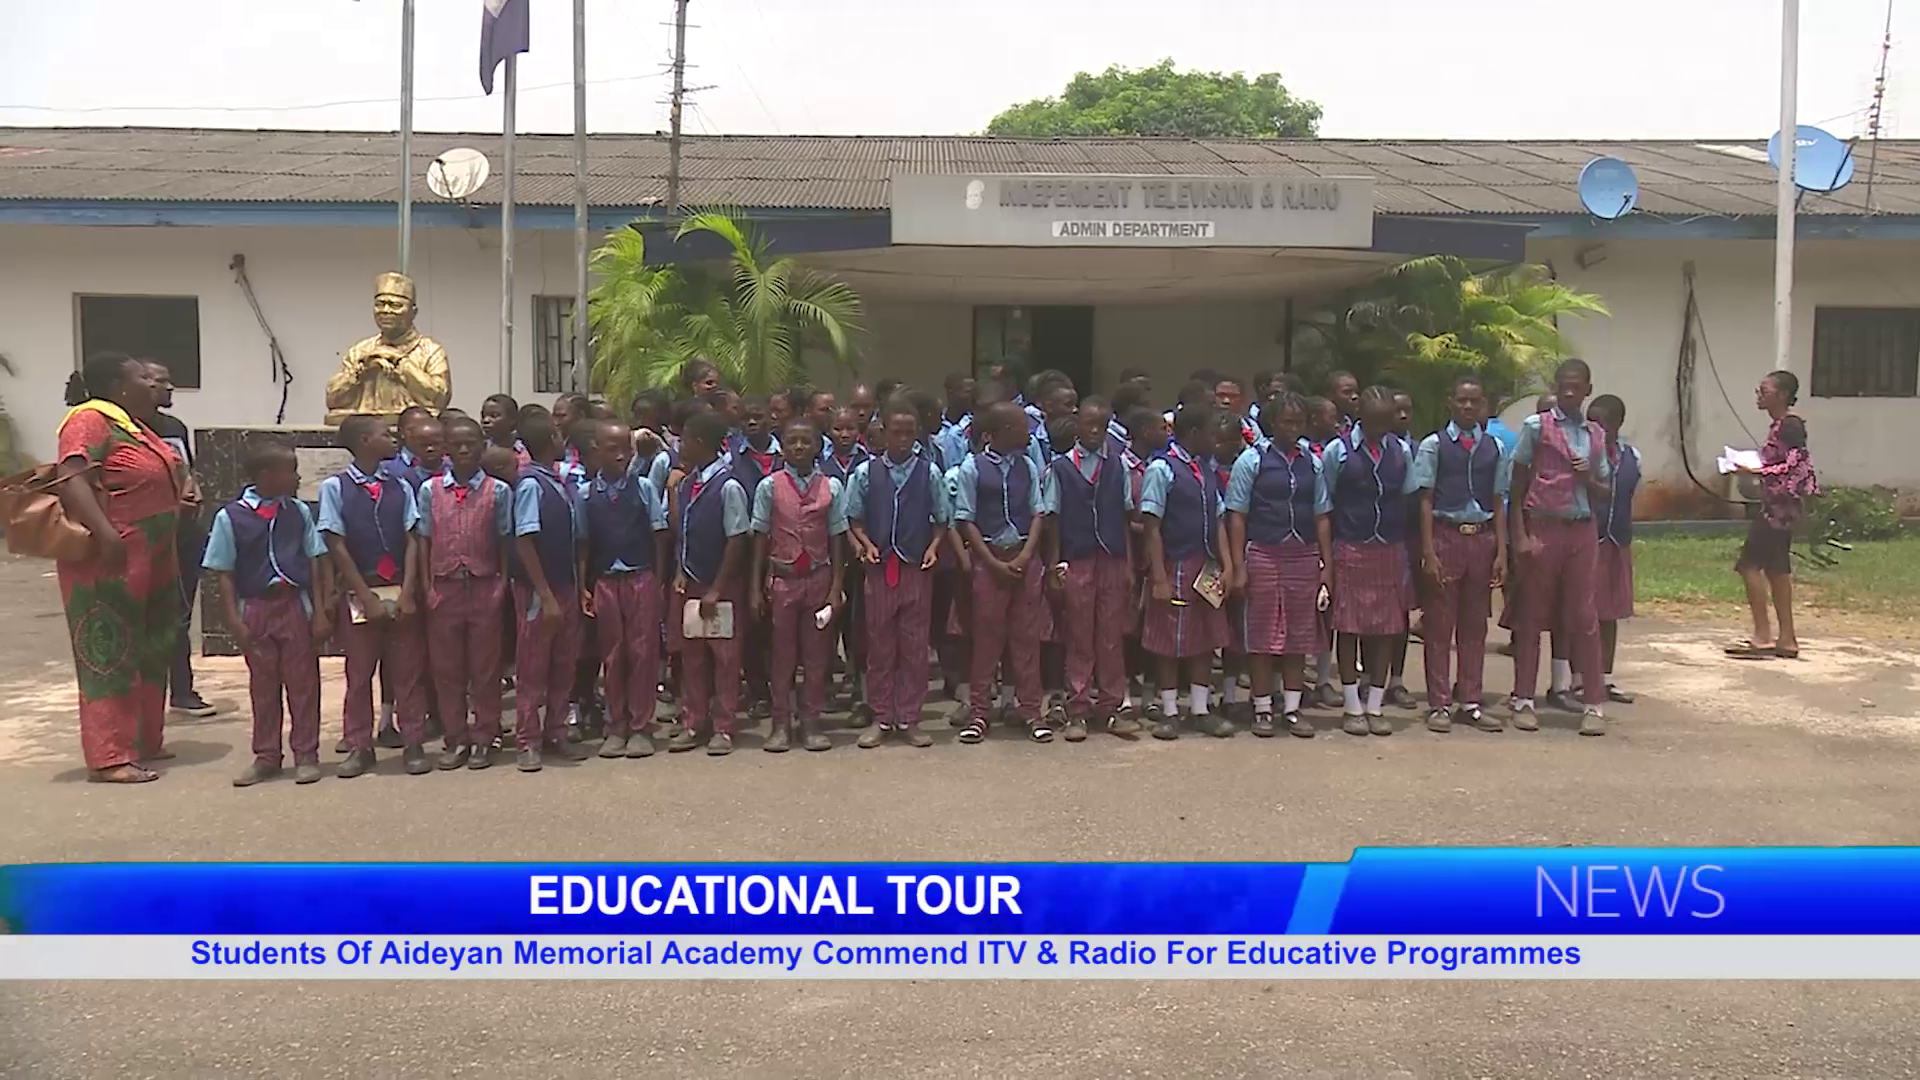 Students Of Aideyan Memorial Academy Commend ITV & Radio For Educative Programmes